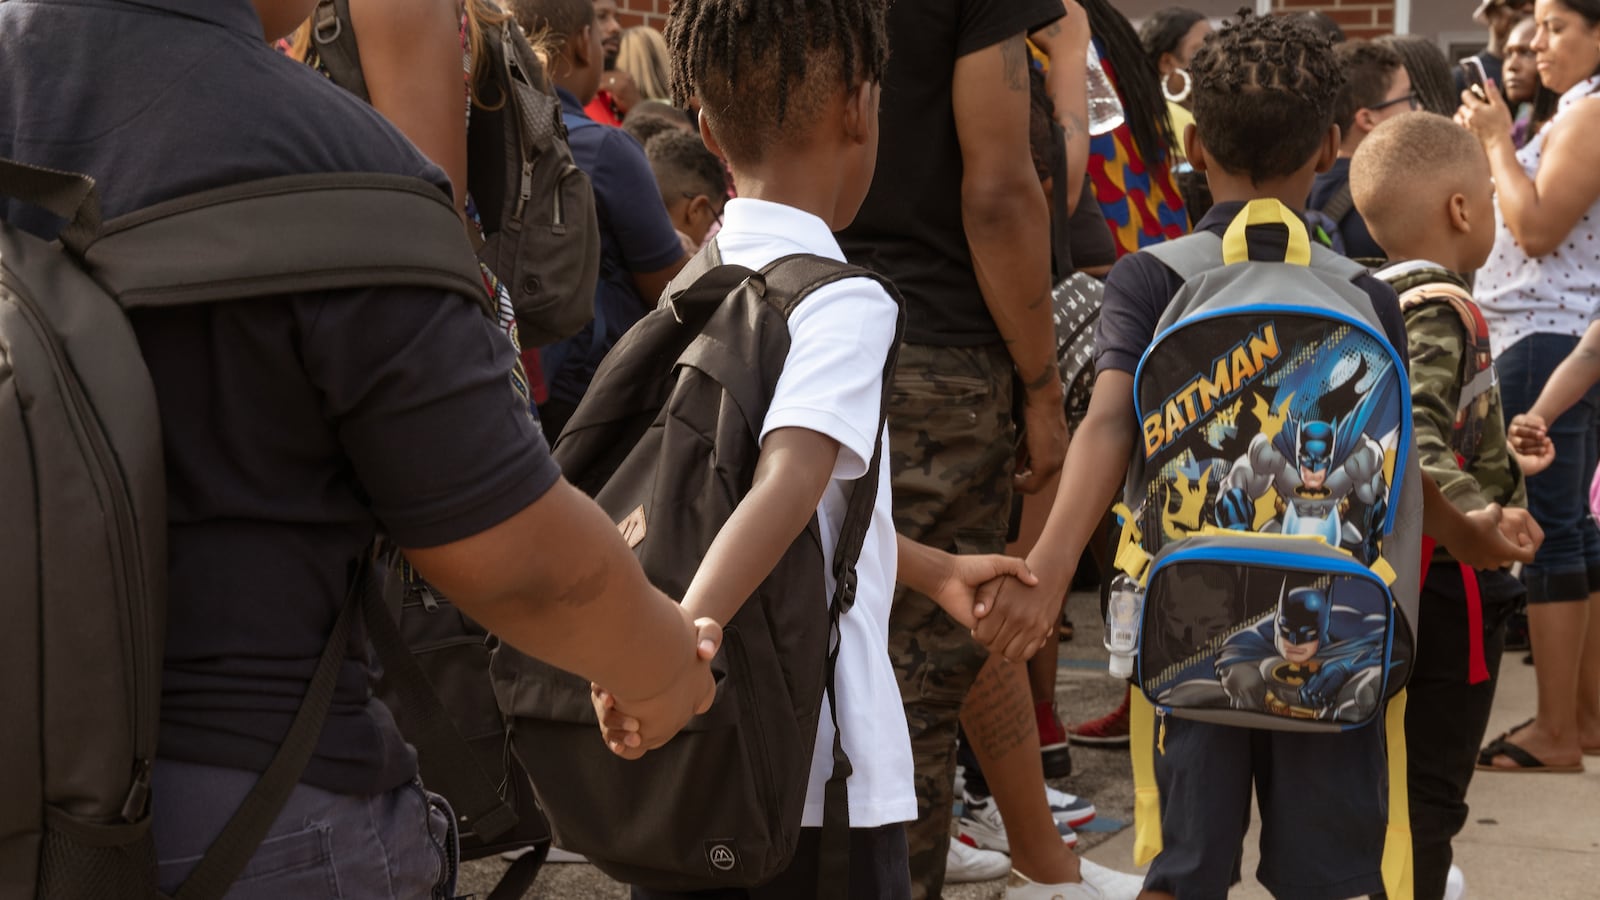 A line of students wearing backpacks hold hands while they walk toward the entrance of school in a crowd of people.